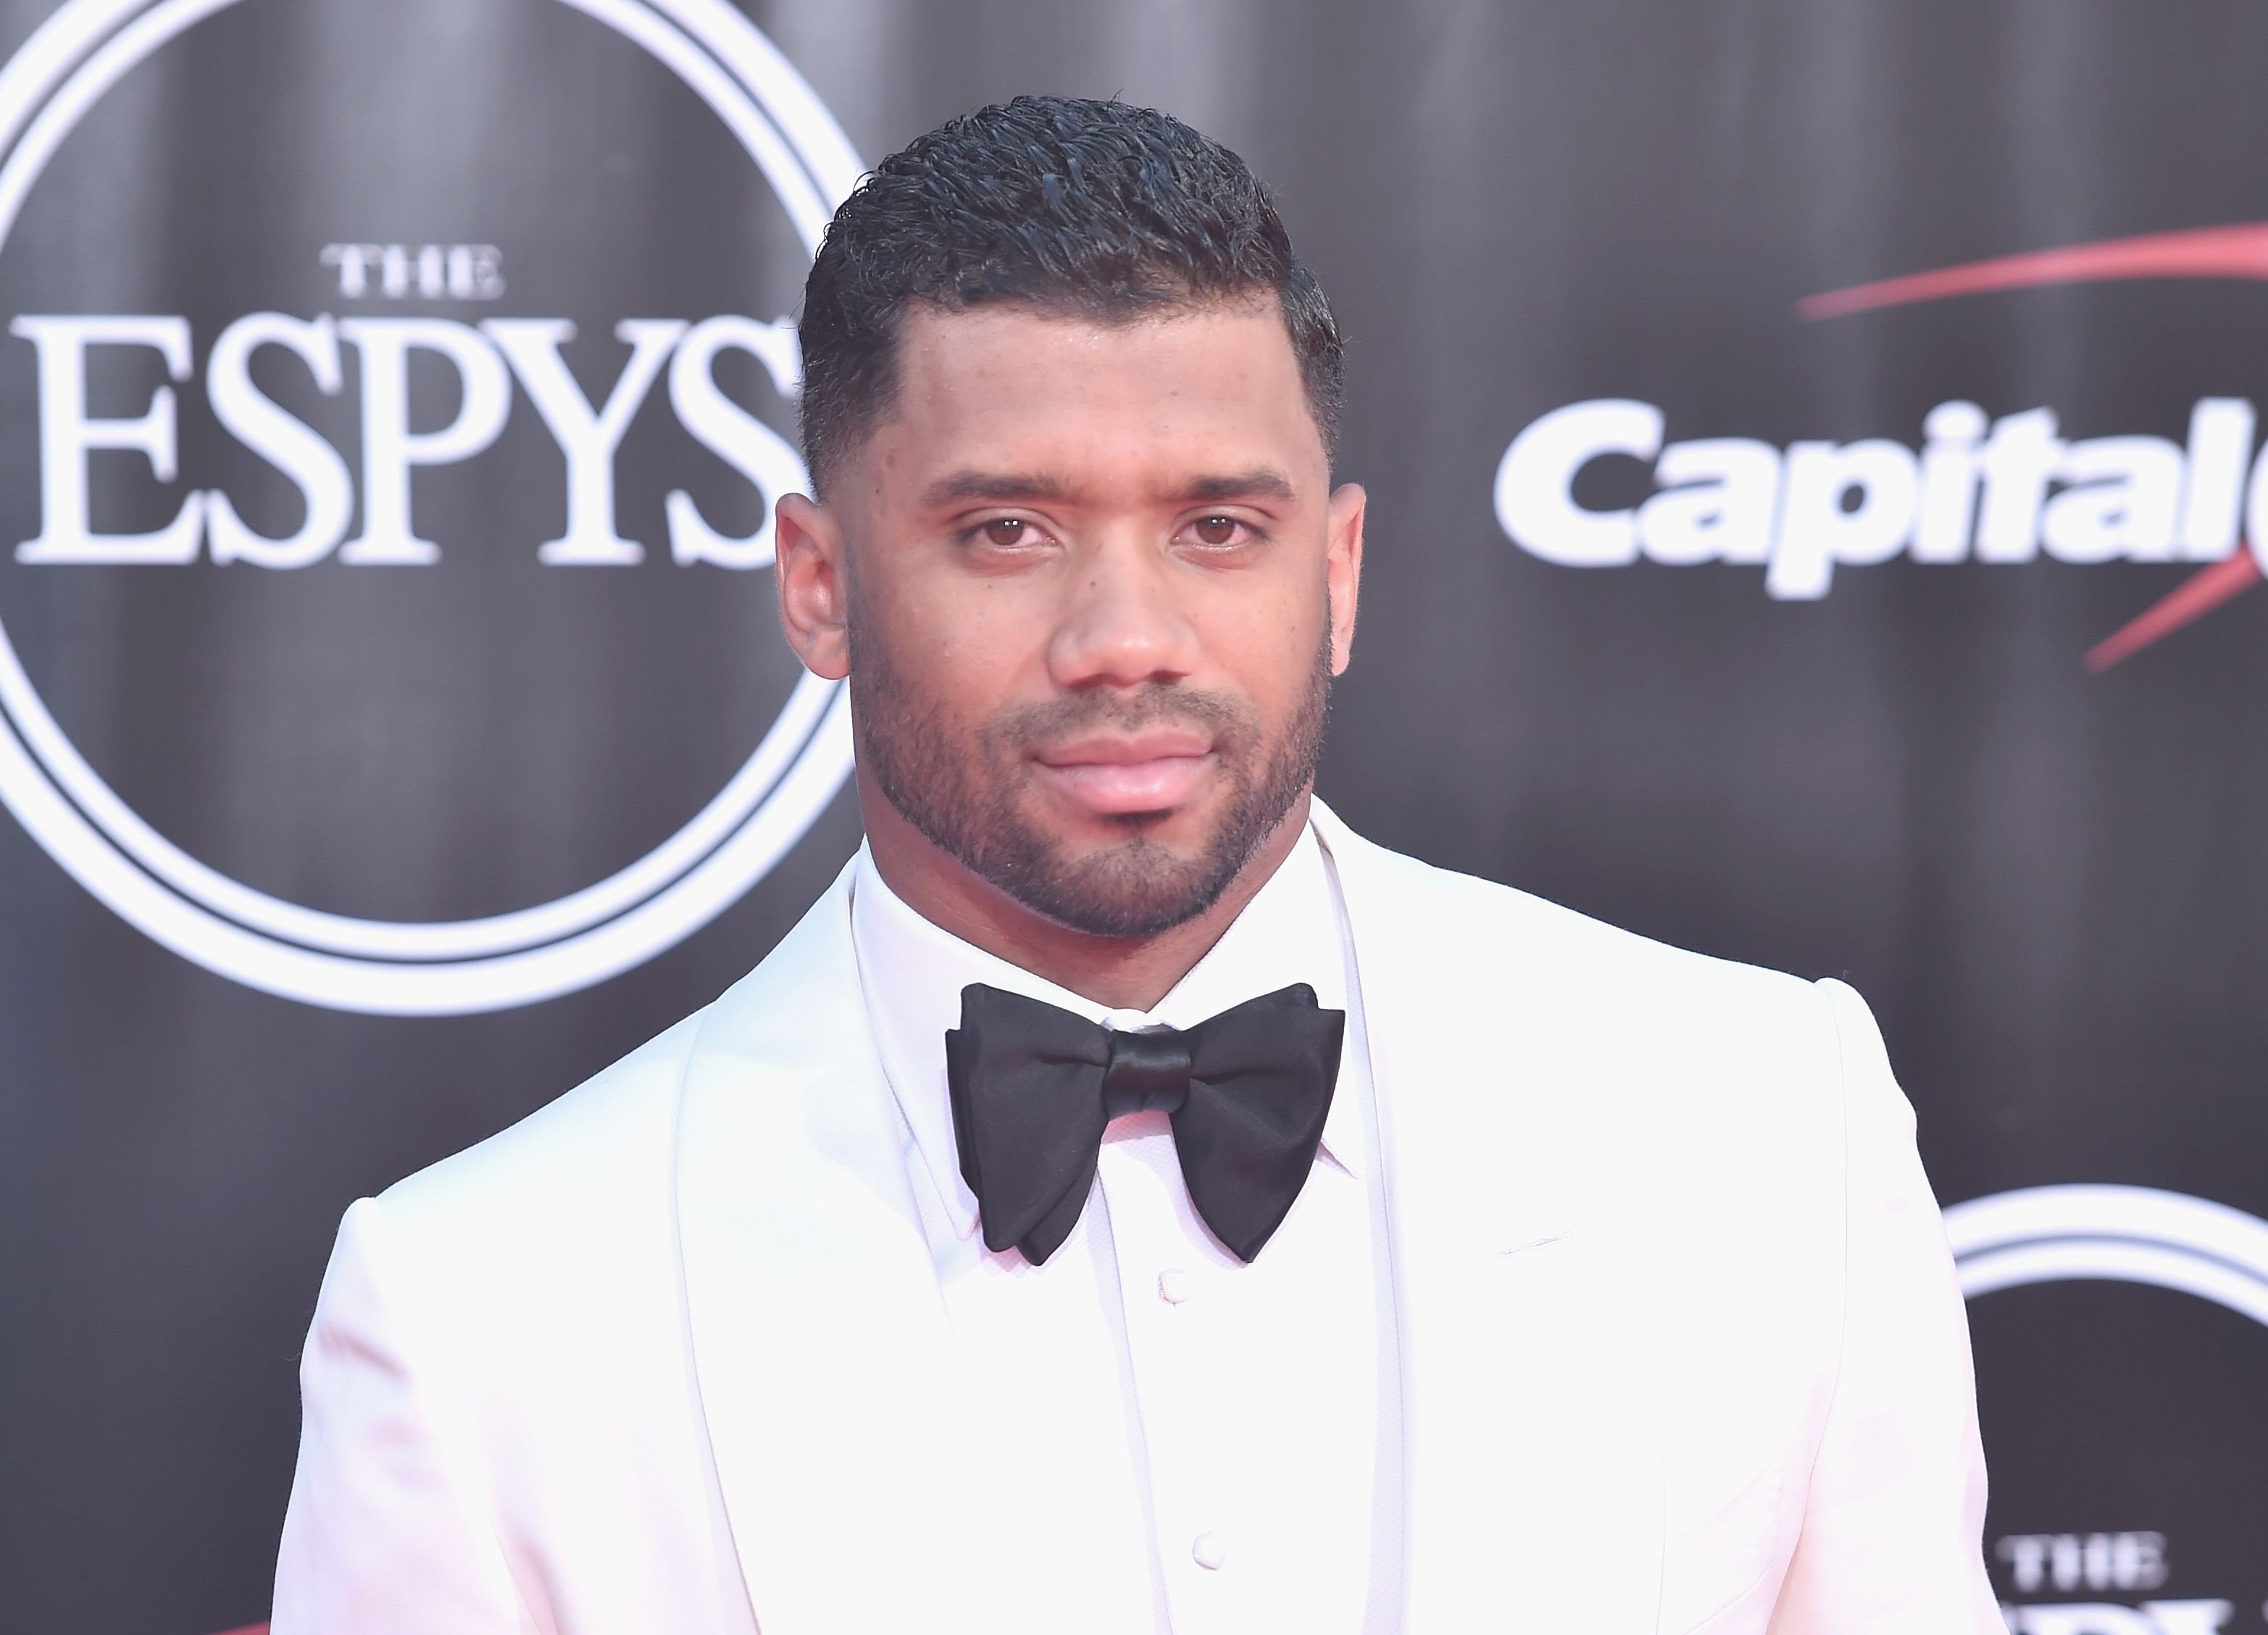 Russell Wilson attending the 2016 ESPYS on July 13, 2016 in Los Angeles. | Photo: Getty Images